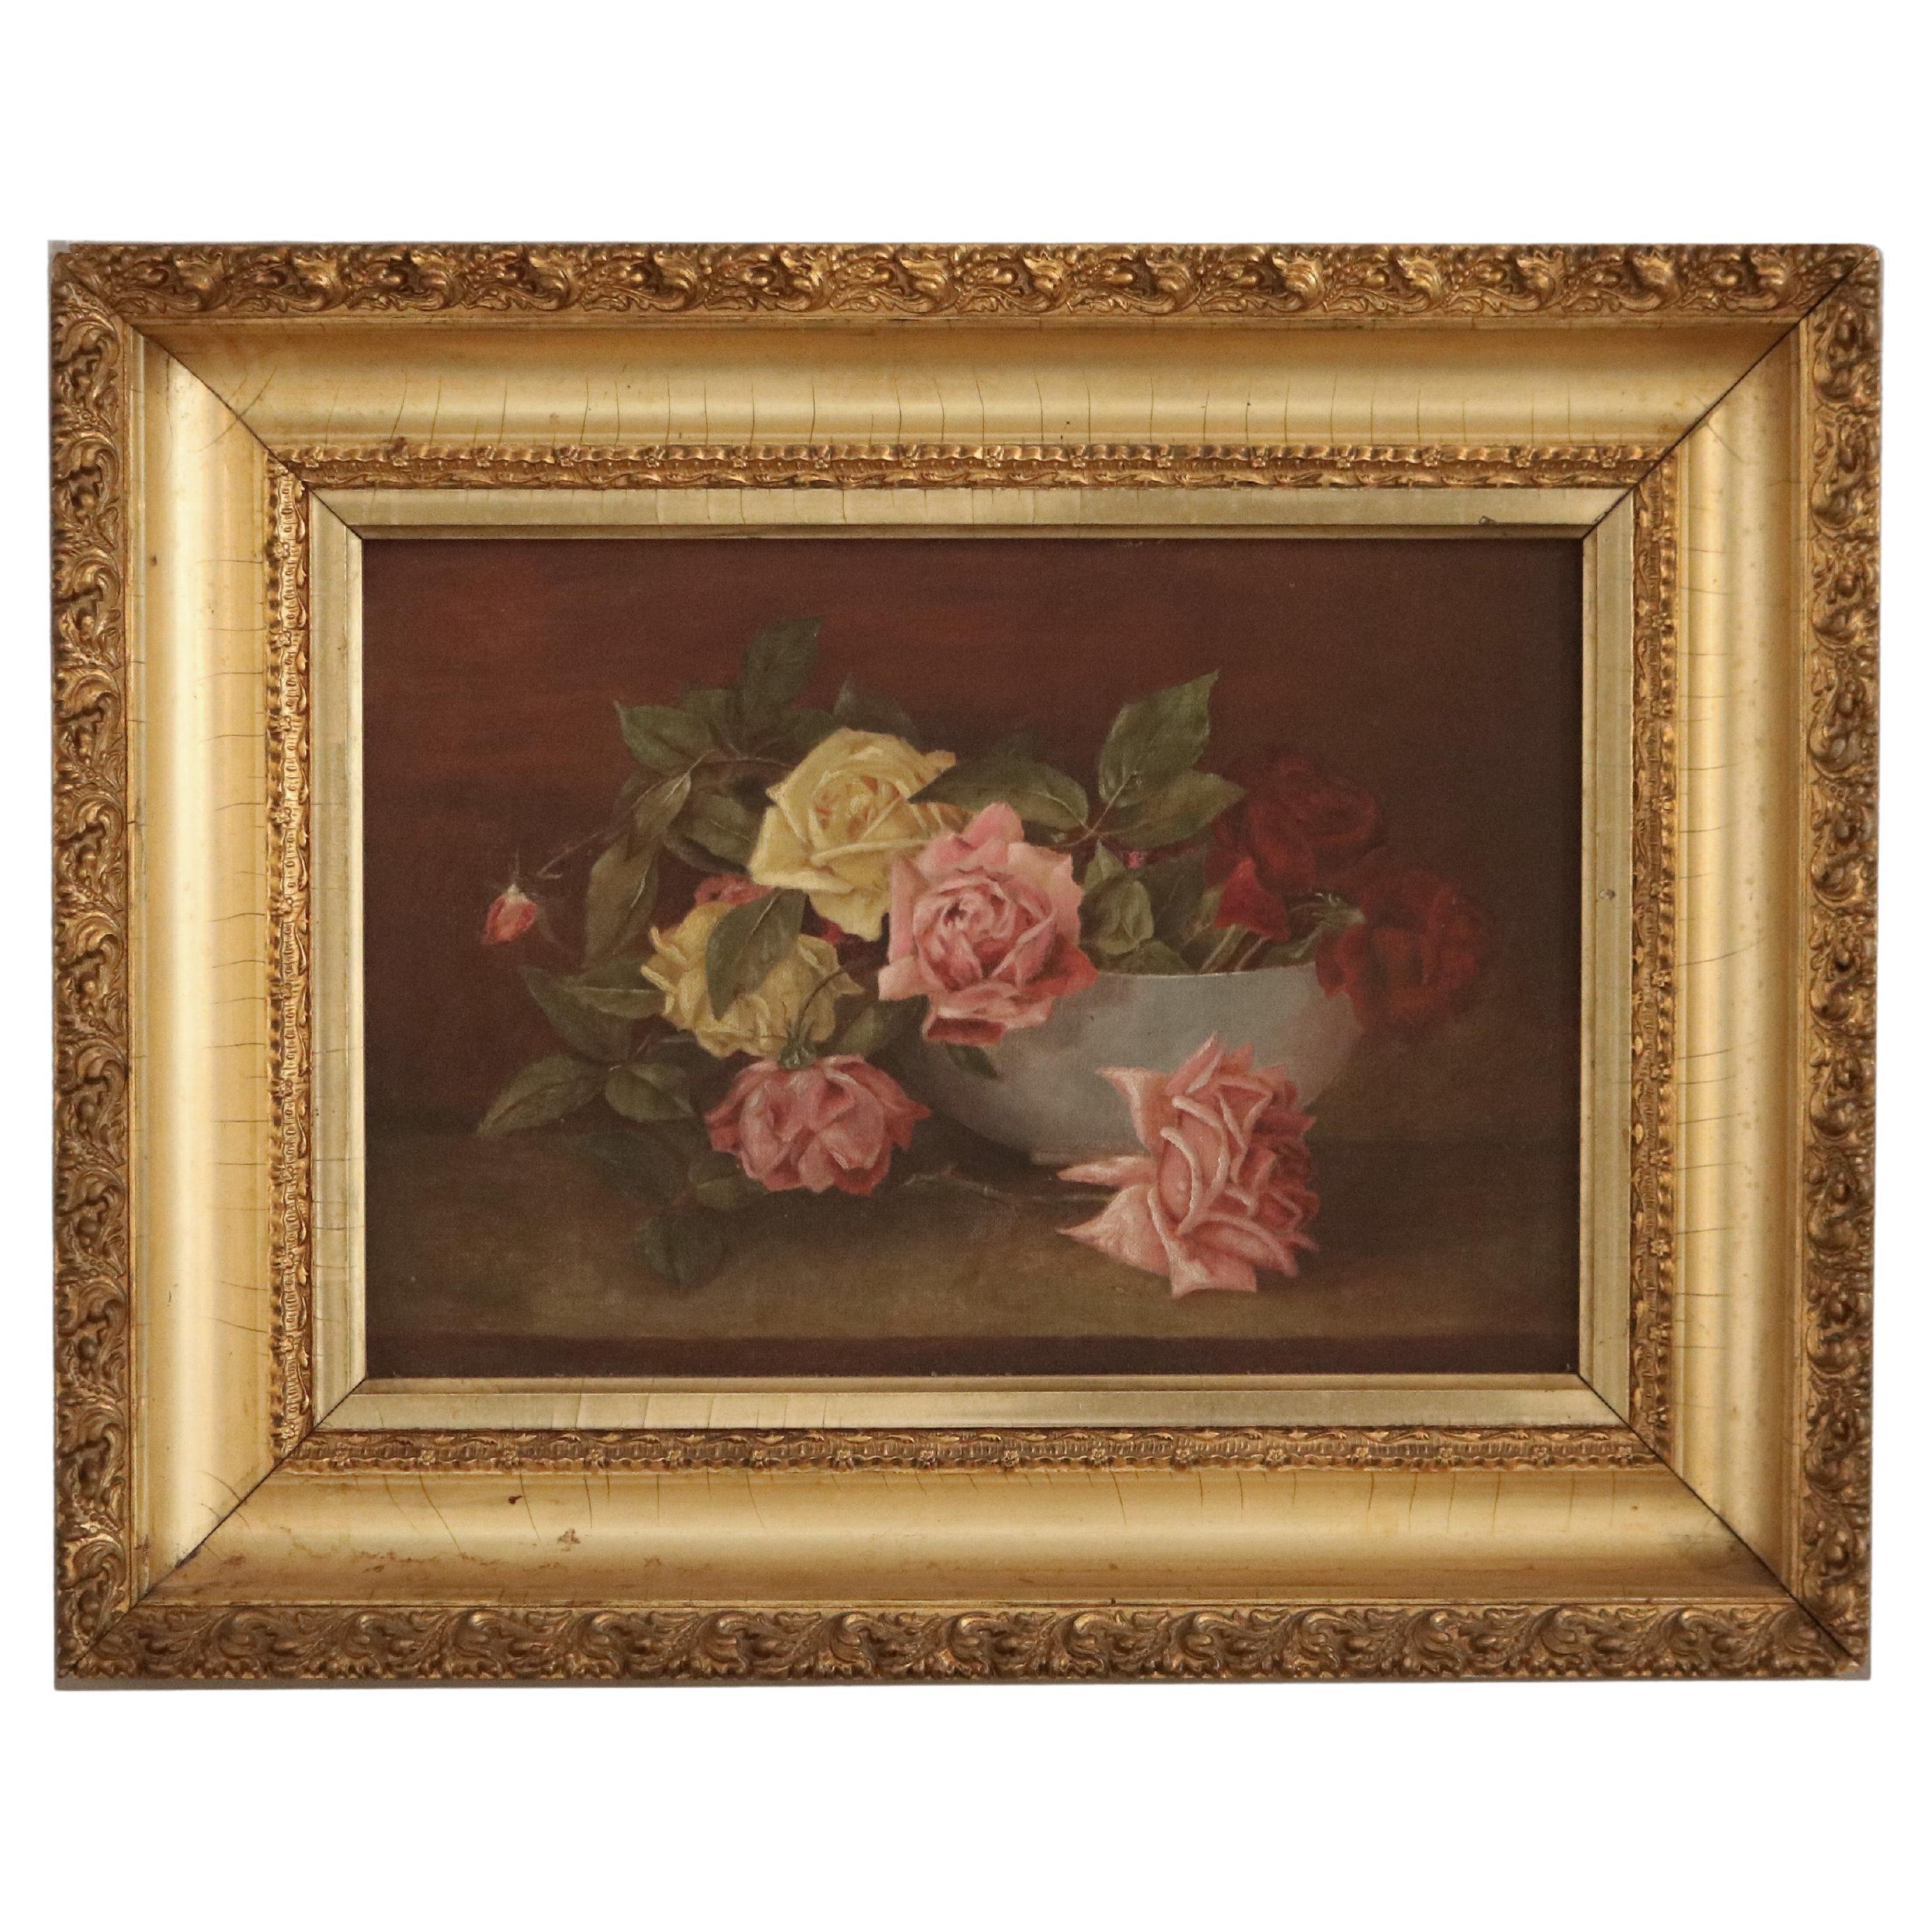 Antique Floral Still Life Painting of Roses in Giltwood Frame, circa 1890